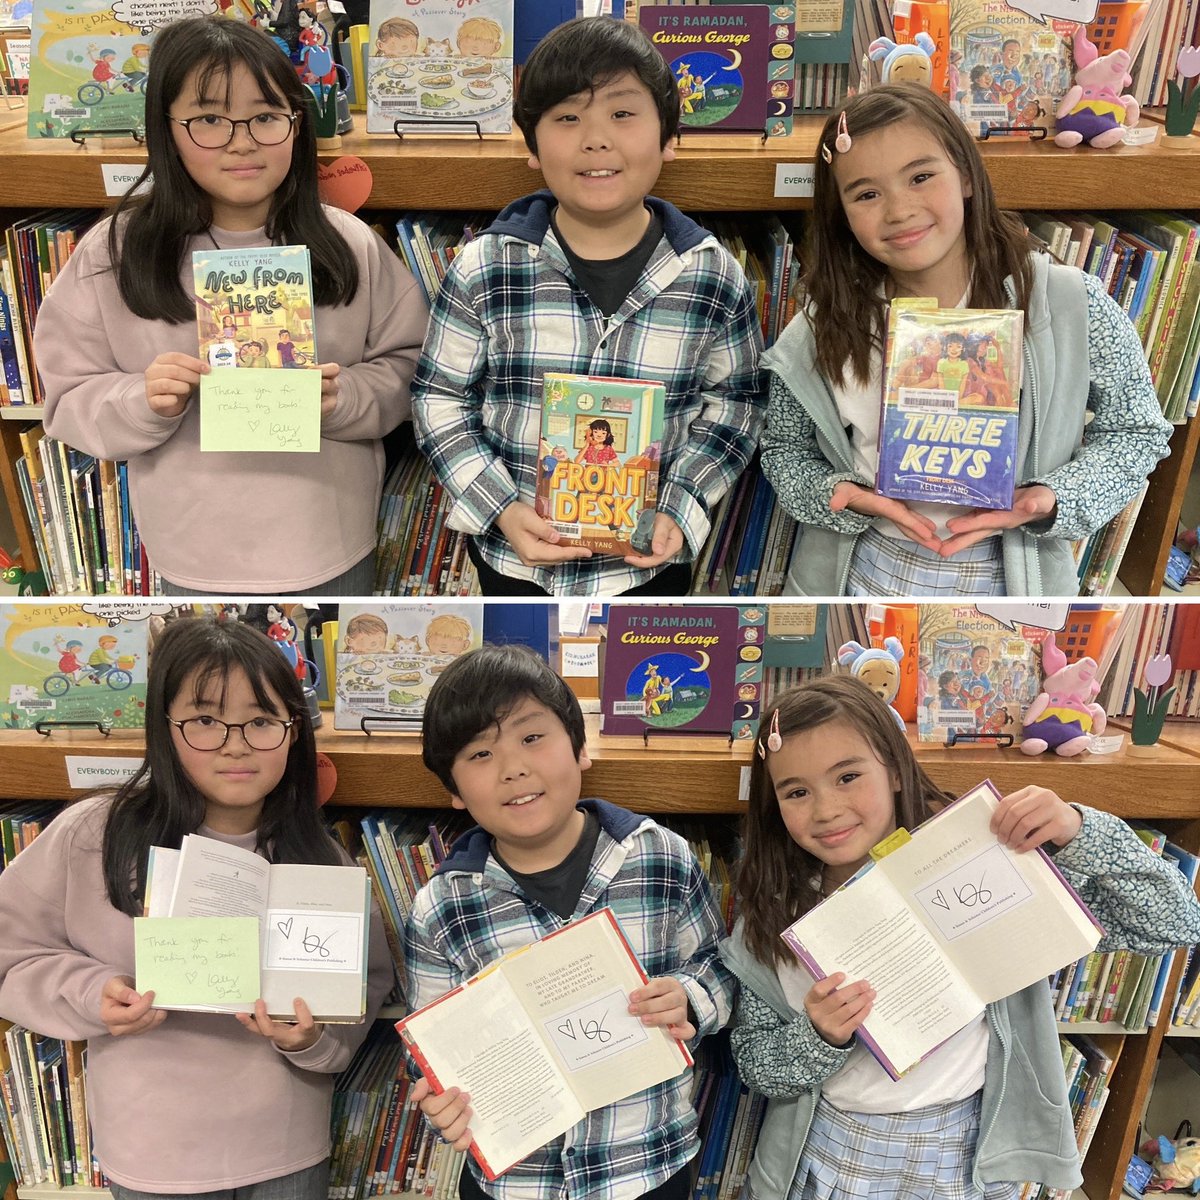 Thank you to @kellyyanghk for her wonderful books and for sending us autographed bookplates for our copies of her books in the Library! So nice! 📚💙📚 #Grateful #KellyYangBooks #ReadtoGrow